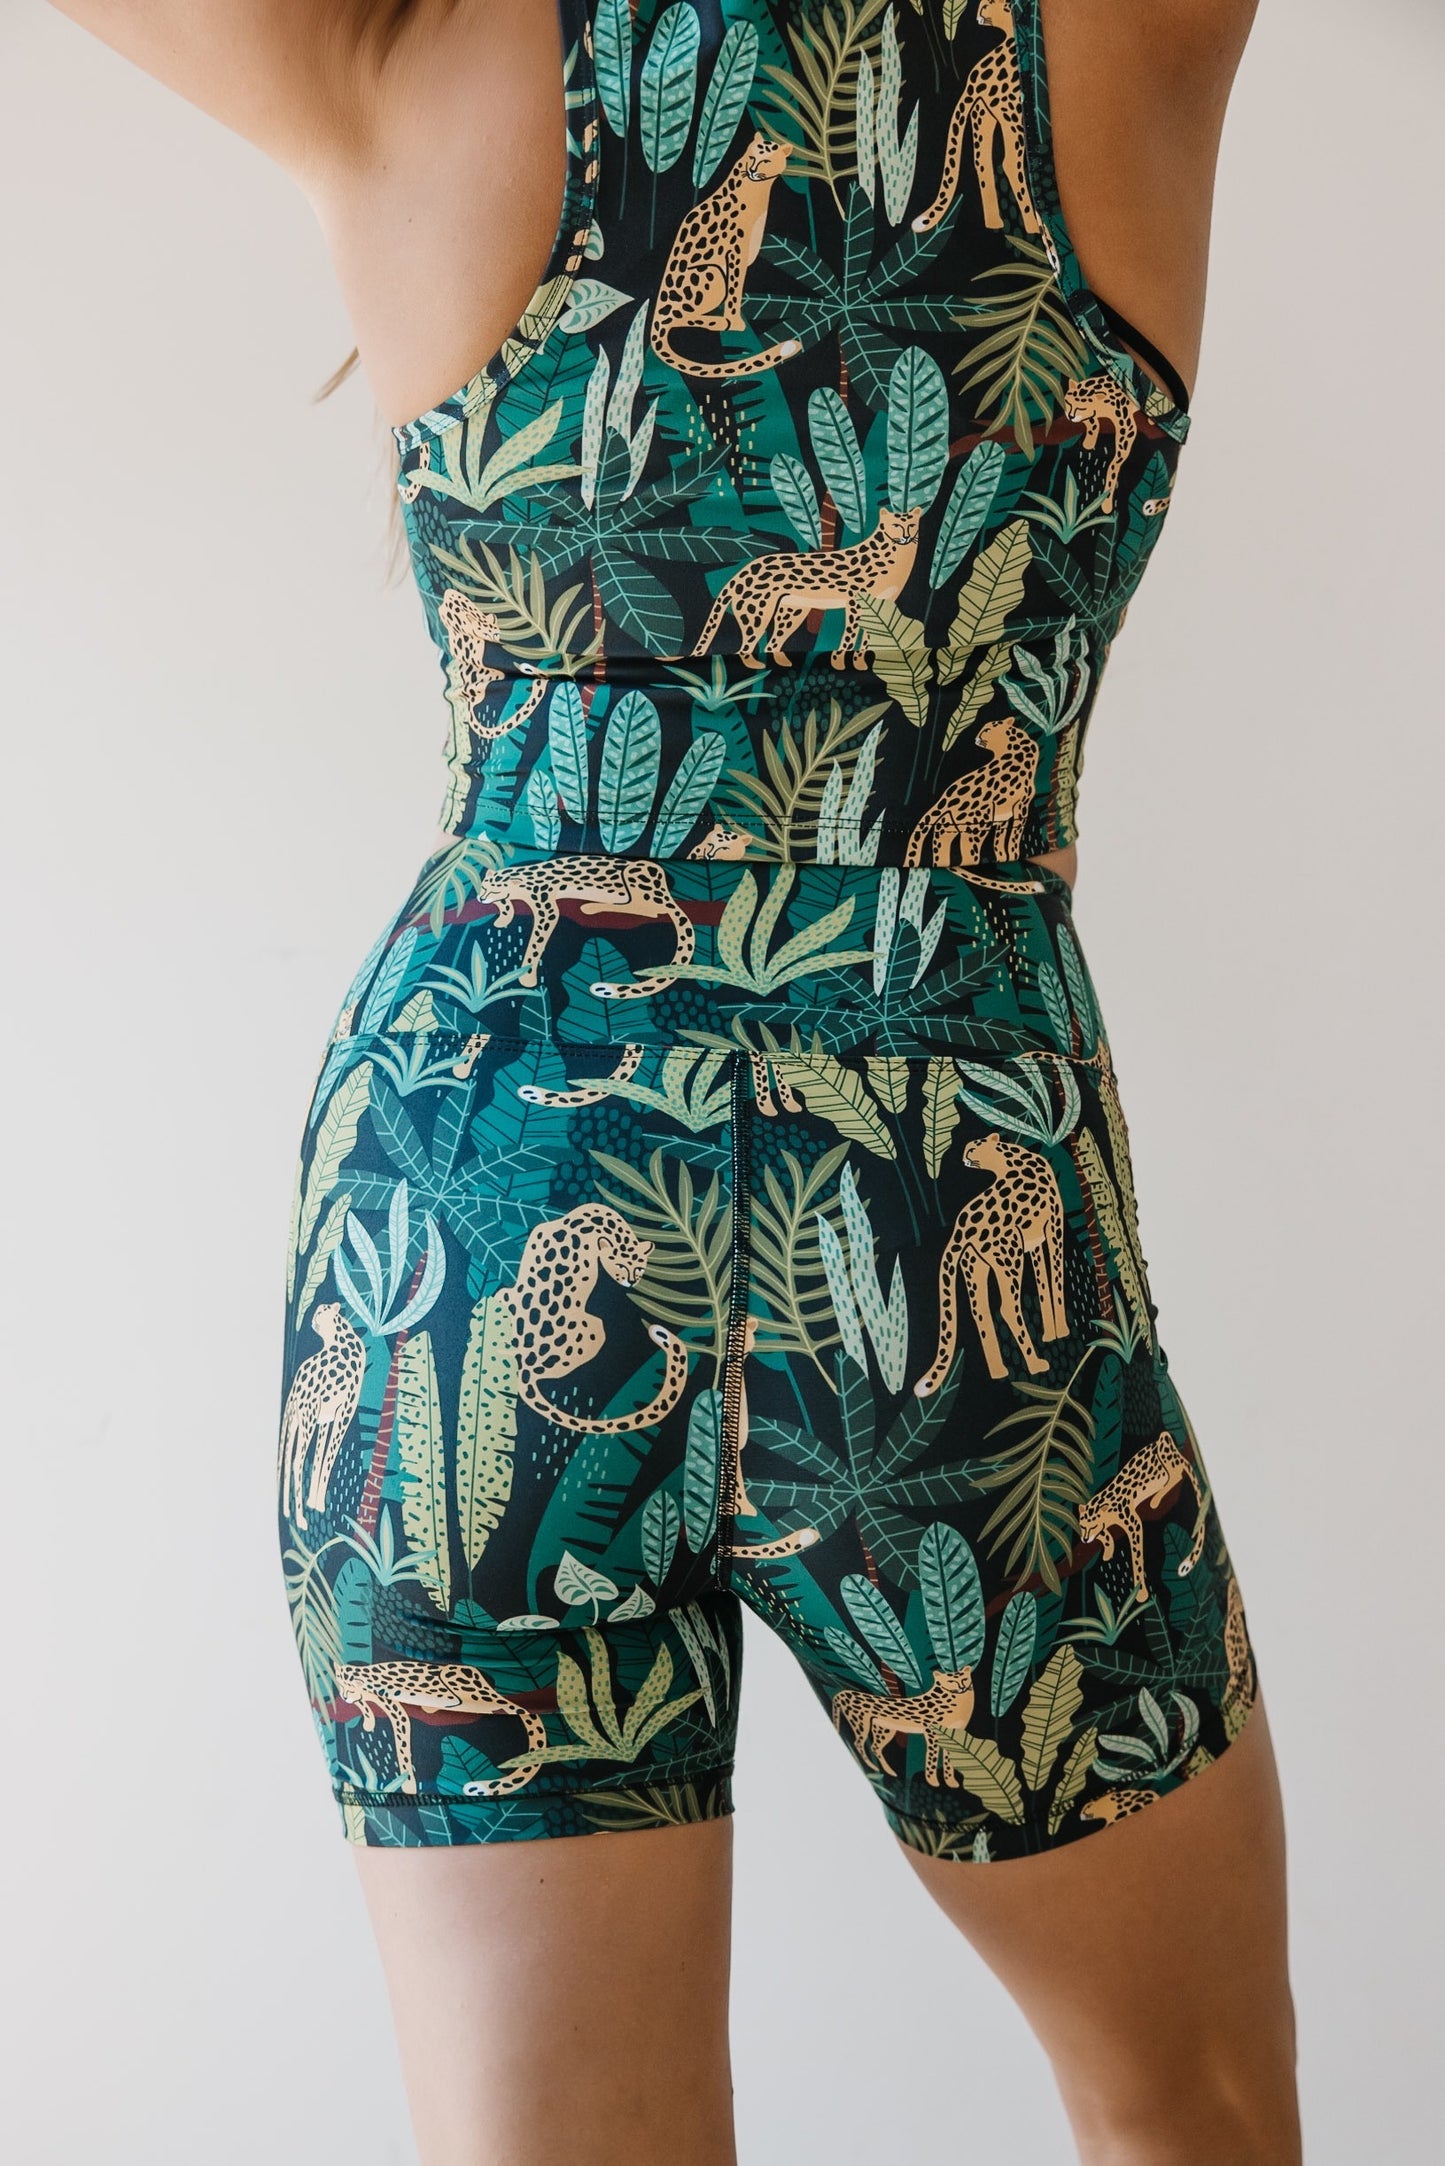 Lace Up Swaay Shorts - Jungle